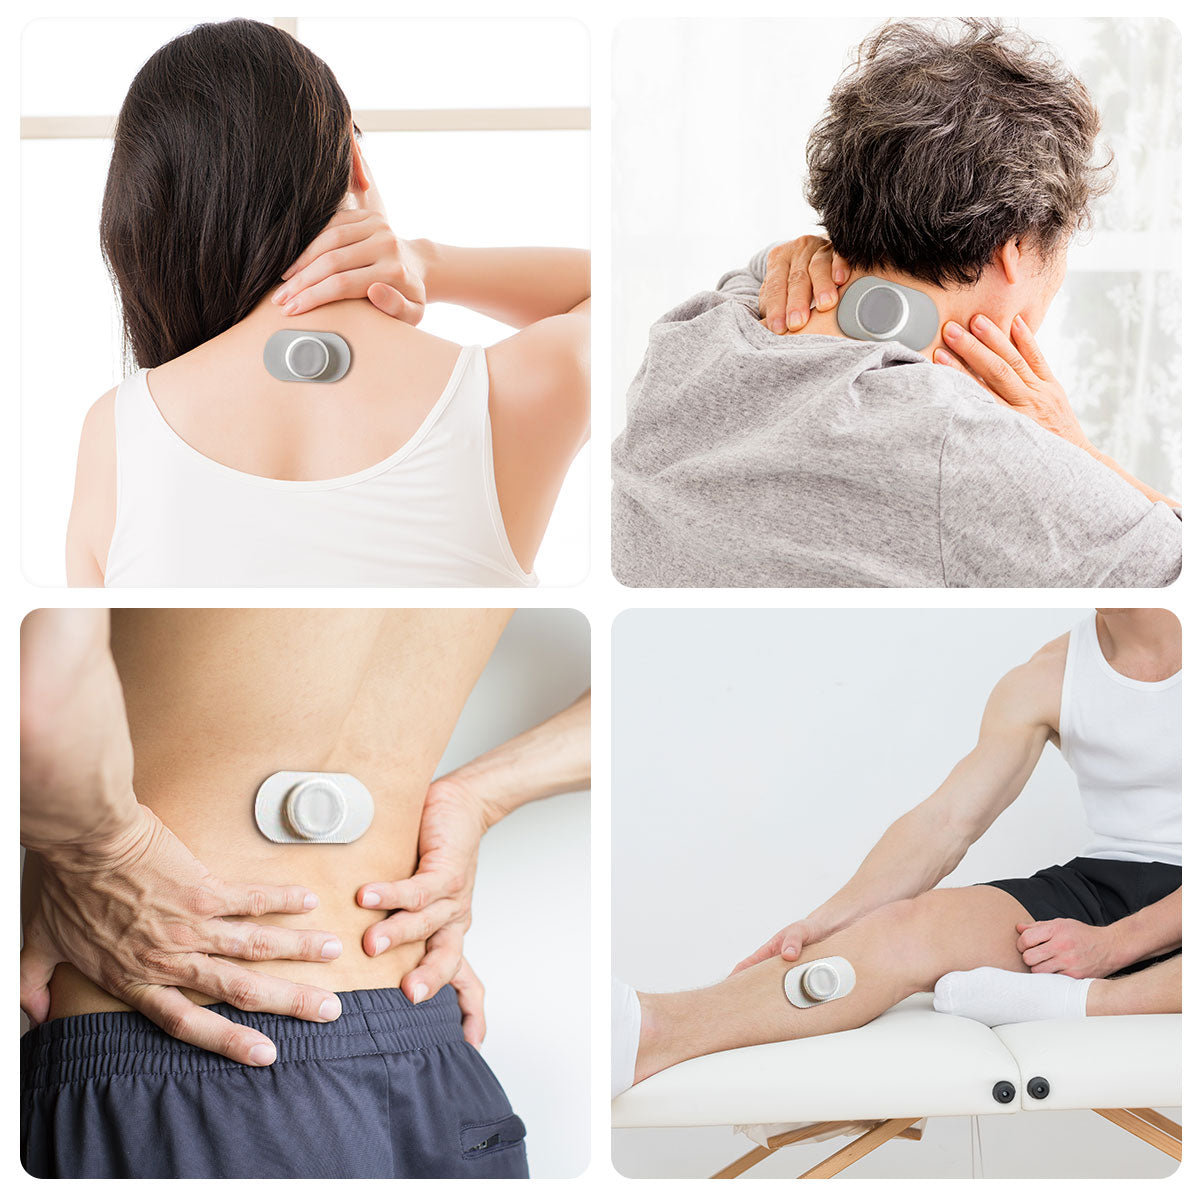 From Pain to Pleasure: 8 Portable Tens Unit Benefits You Didn’t Know About